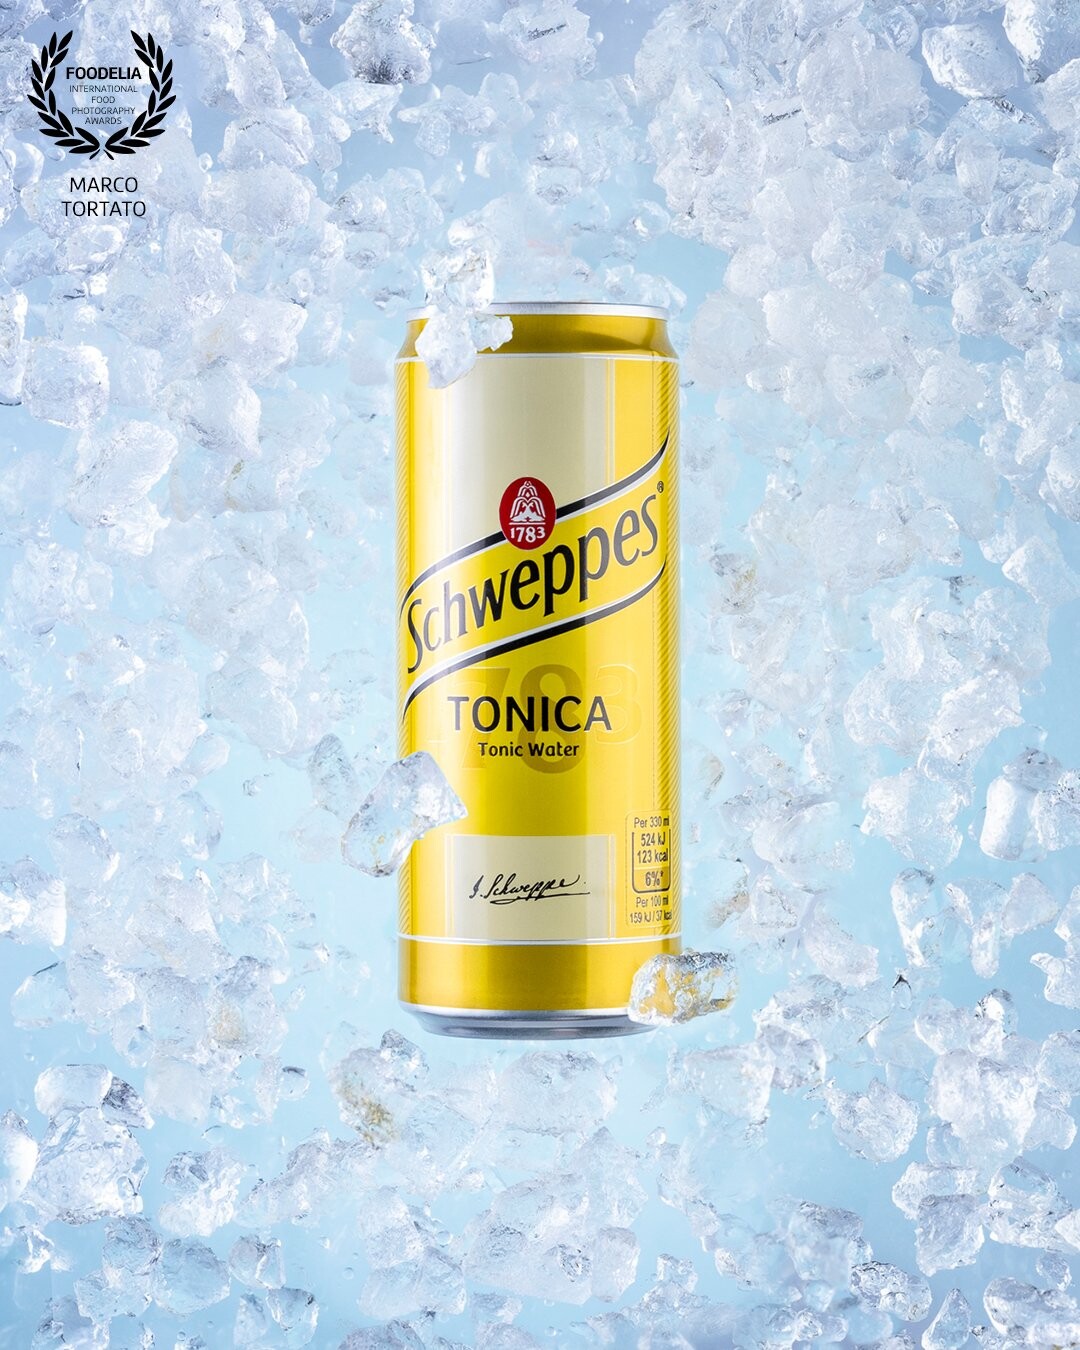 Schweppes on the rocks. <br />
I love tonic water when I am thirsty during Summer.<br />
Conegliano (TV) - Italy<br />
@yorick_food_and_wine<br />
marcotortato.it